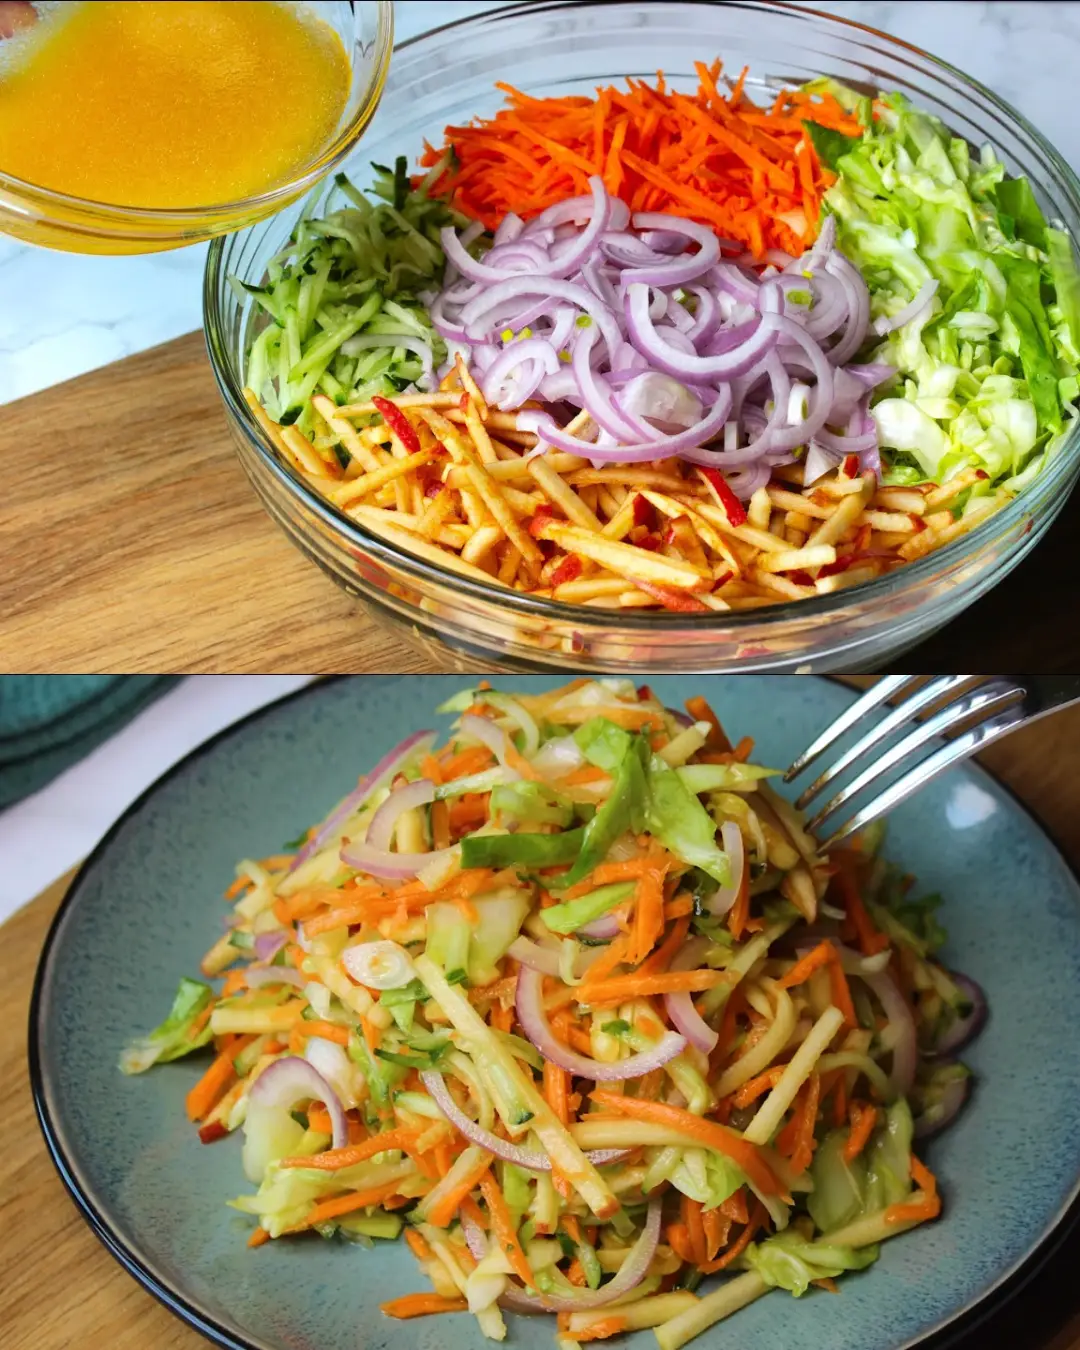 Eat this salad every day and lose weight! Dinner to quickly lose 15 kg!